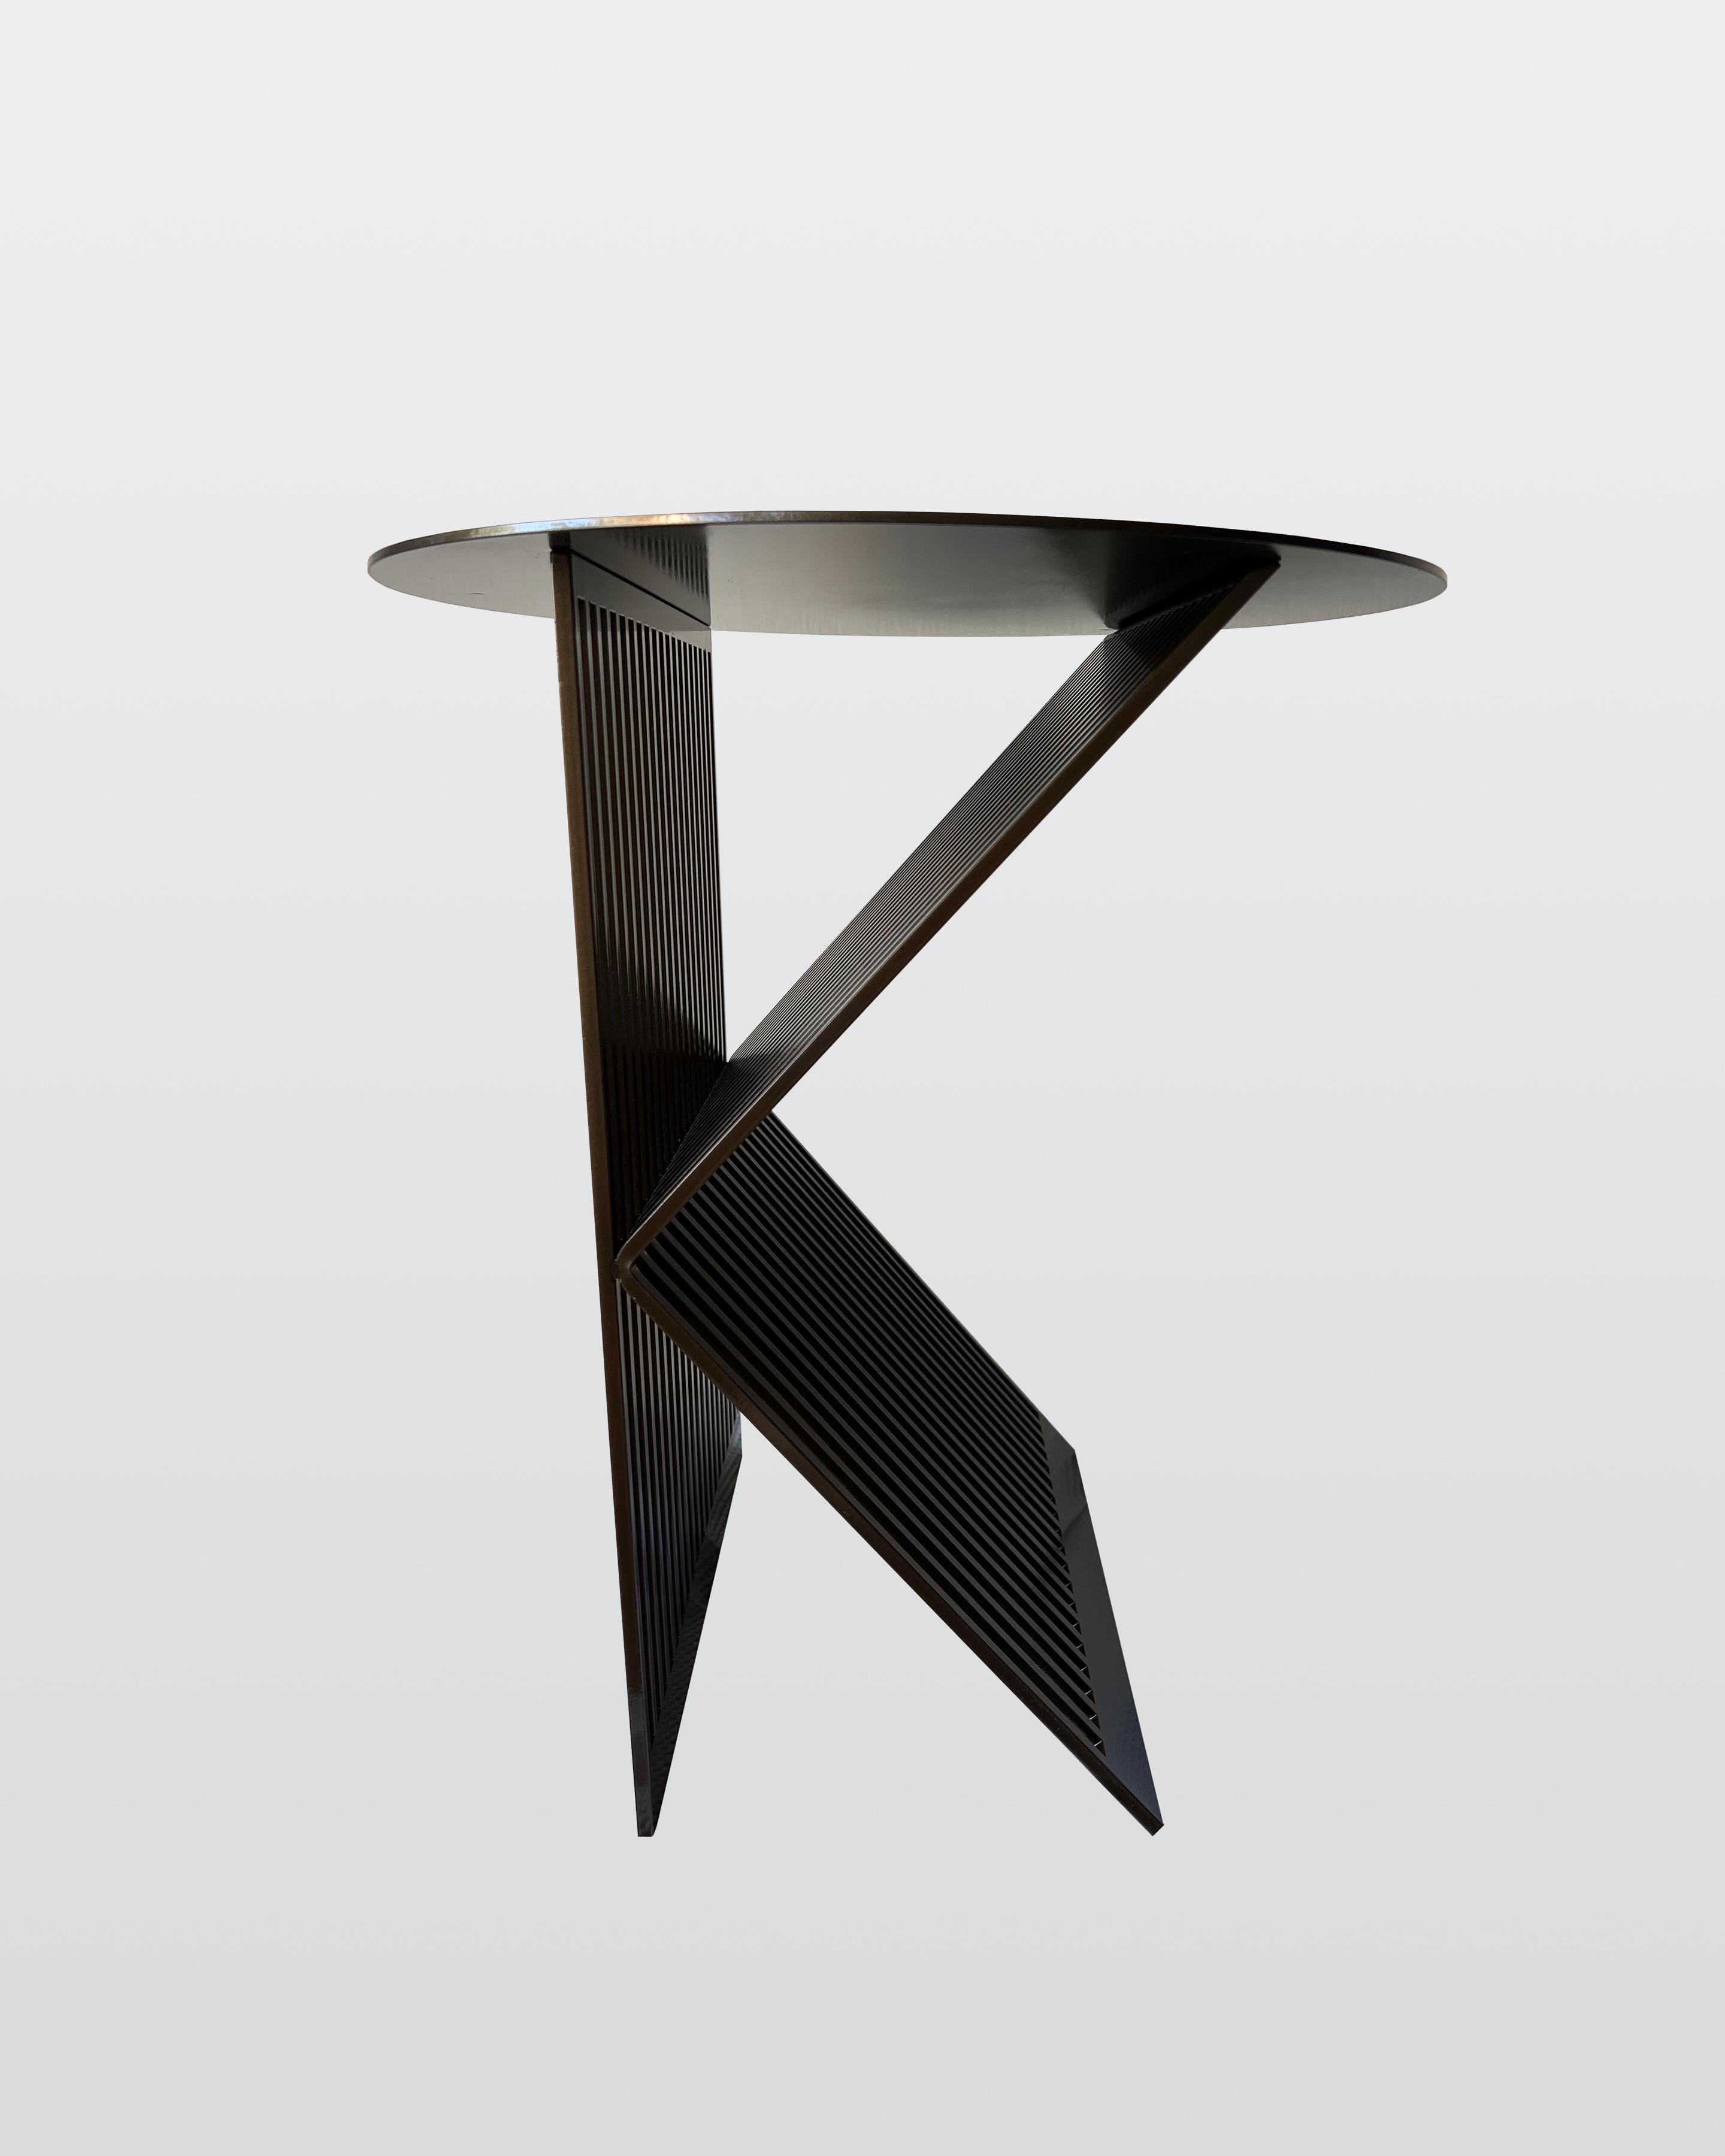 The contemporary lines of K tables draw a direct influence from a personal passion for architecture. Incorporating a rhythm between solid and void, the continuation of steel rods extends a silent voice between light and shadow to form. 